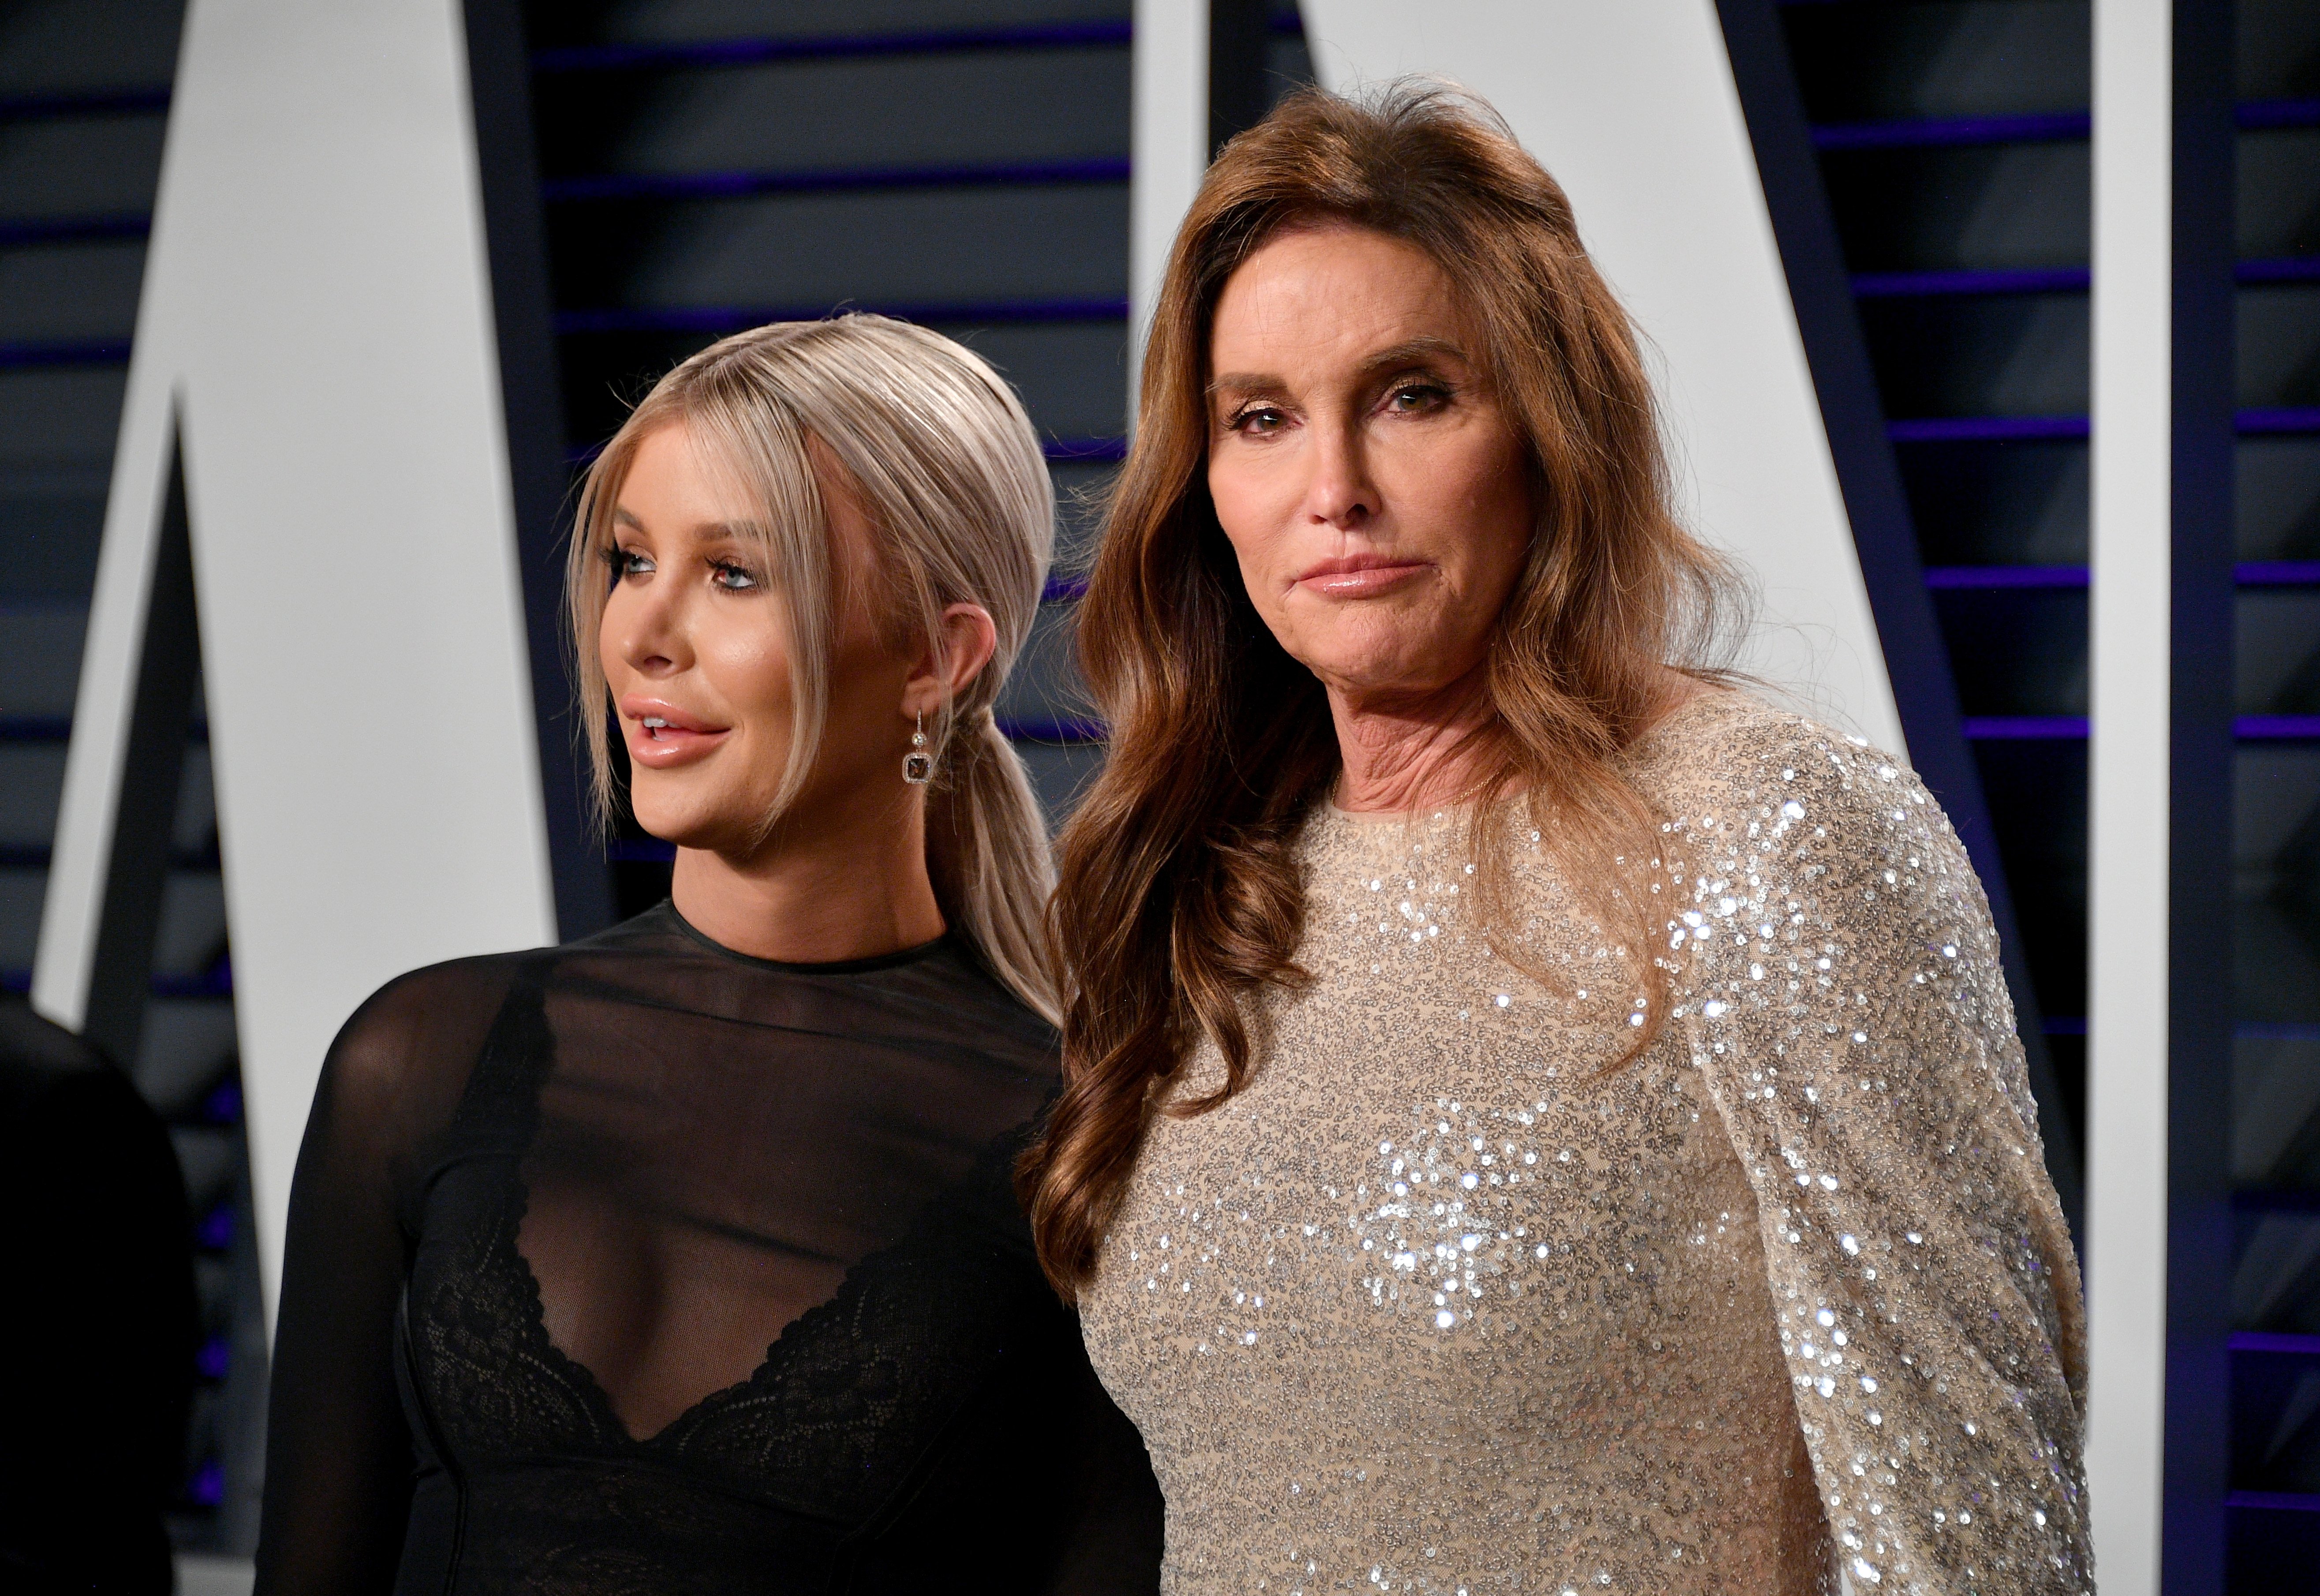 Sophia Hutchins and Caitlyn Jenner attend the 2019 Vanity Fair Oscar Party on February 24, 2019 | Photo: GettyImages